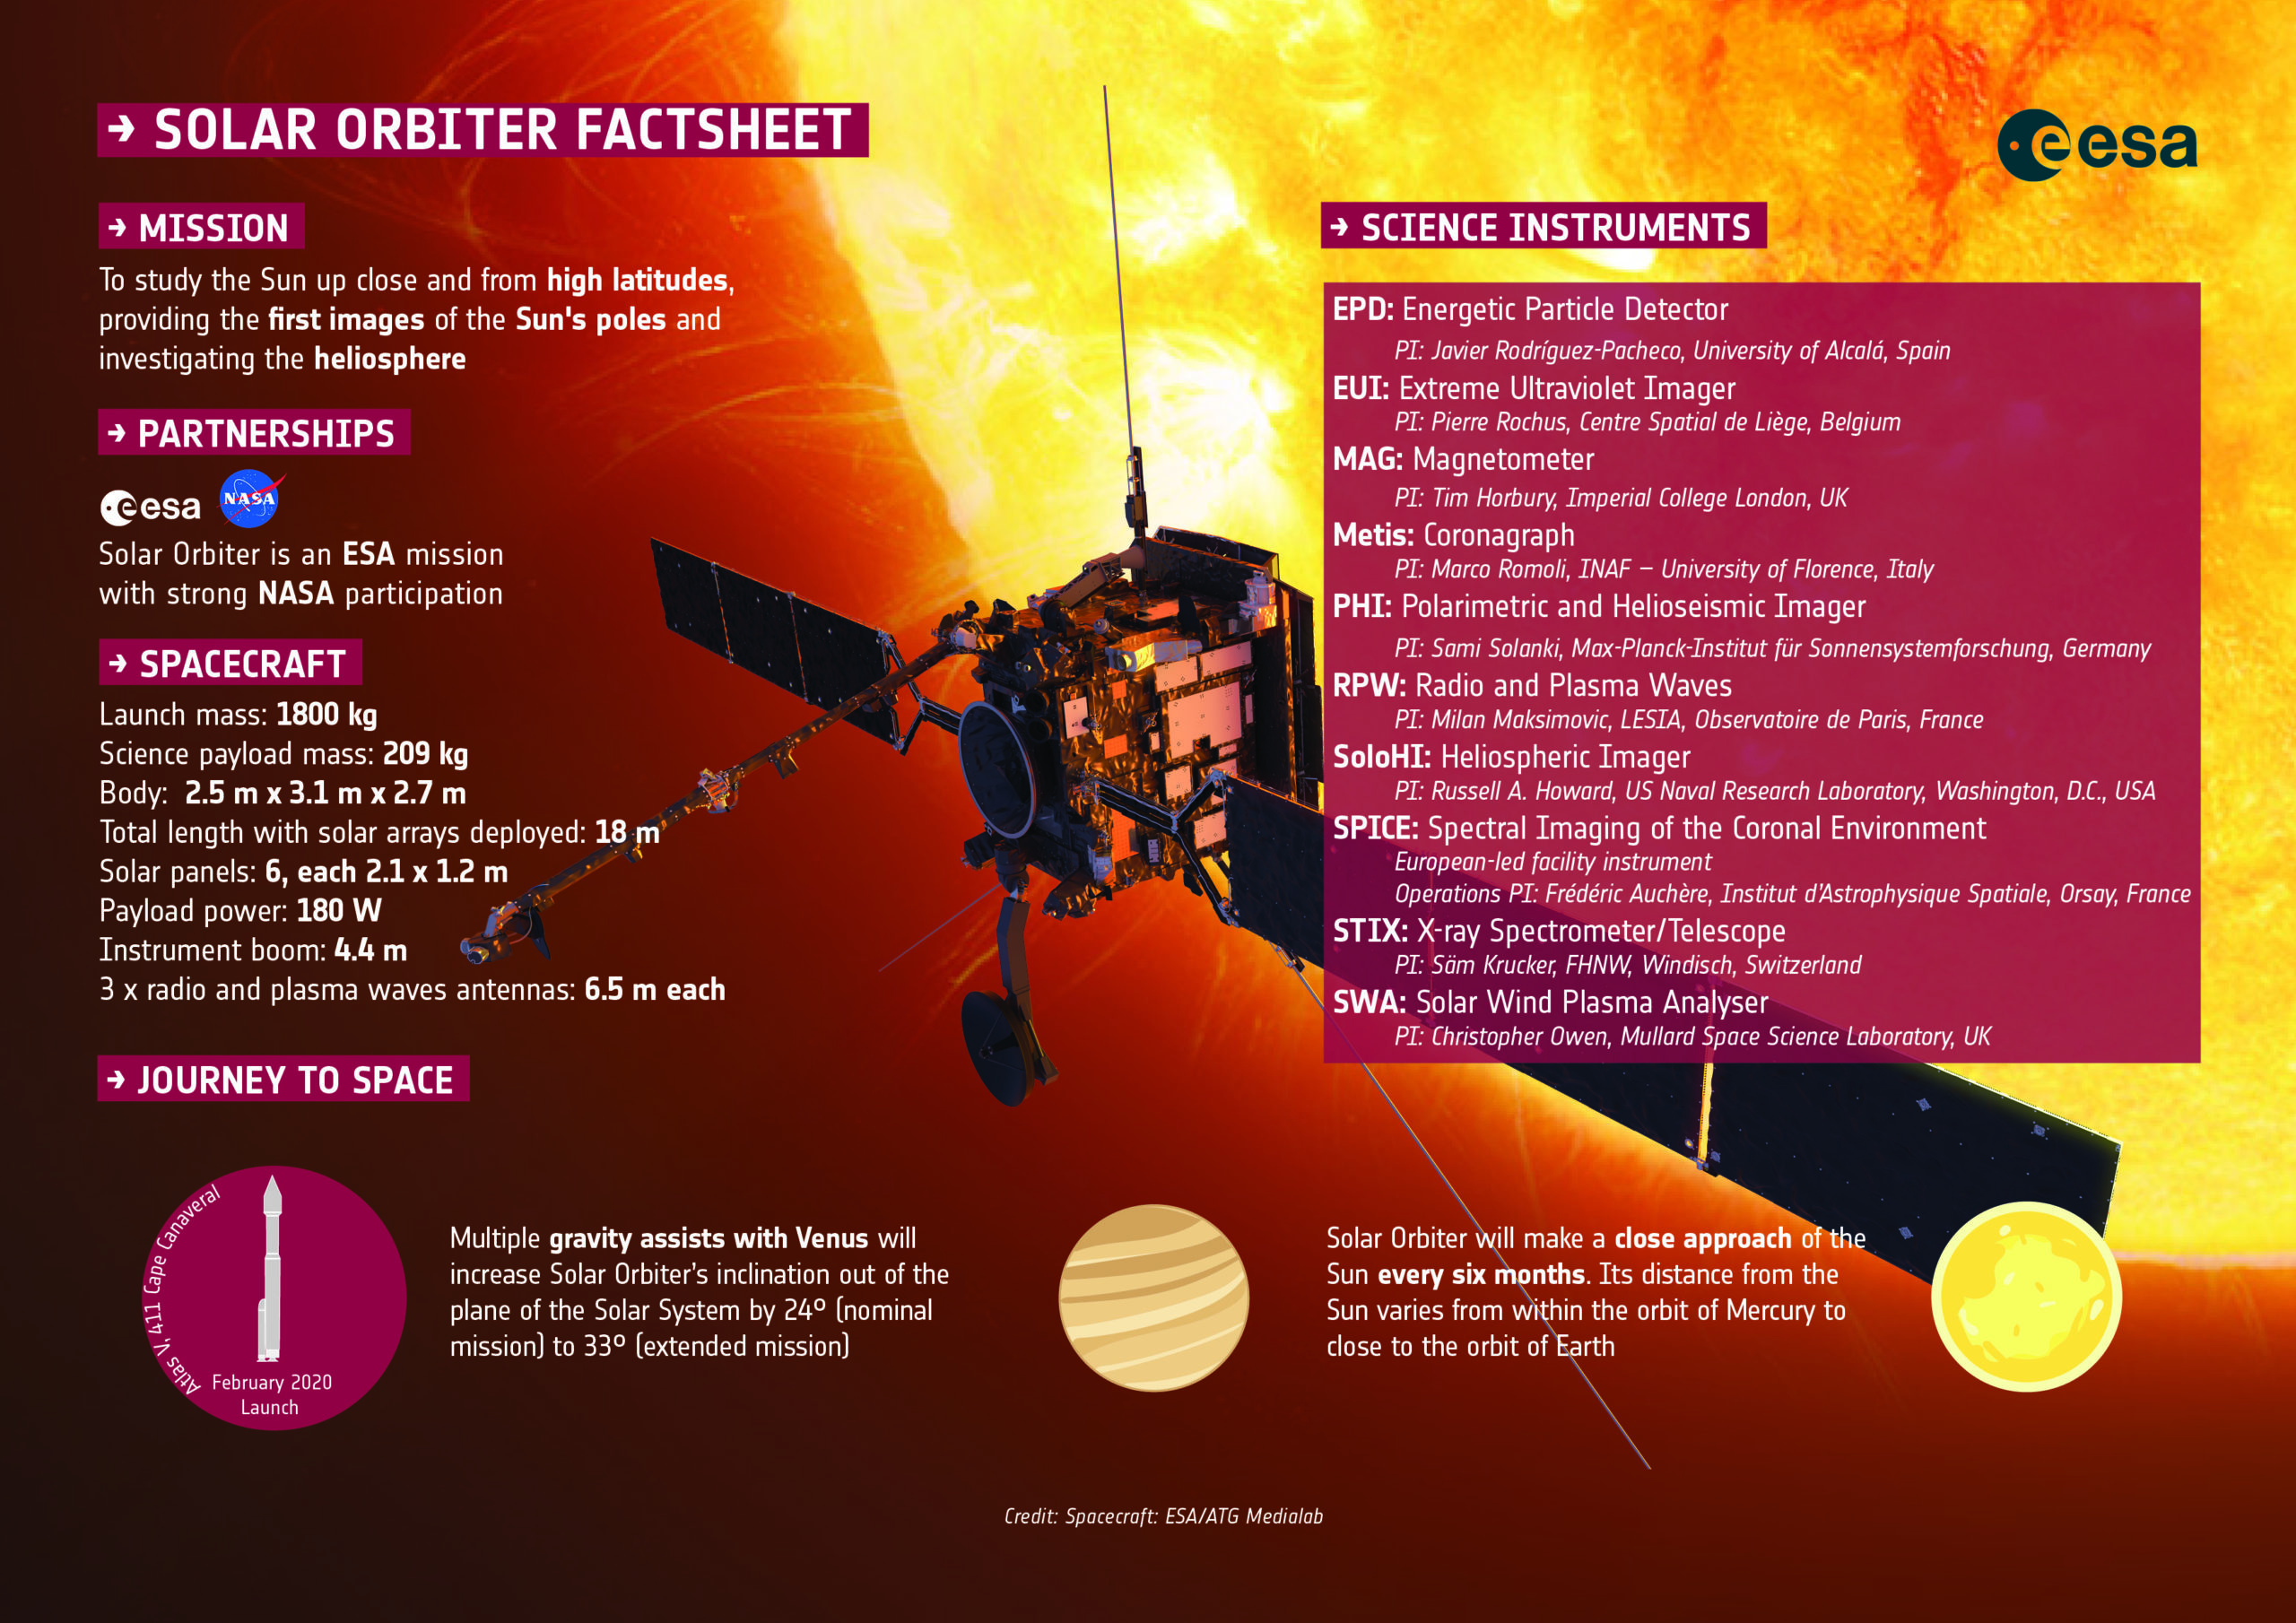 Solar Orbiter factsheet about the mission, partnerships, spacecraft, the science instruments and its journey to space. credit: ESA/ATG medialab